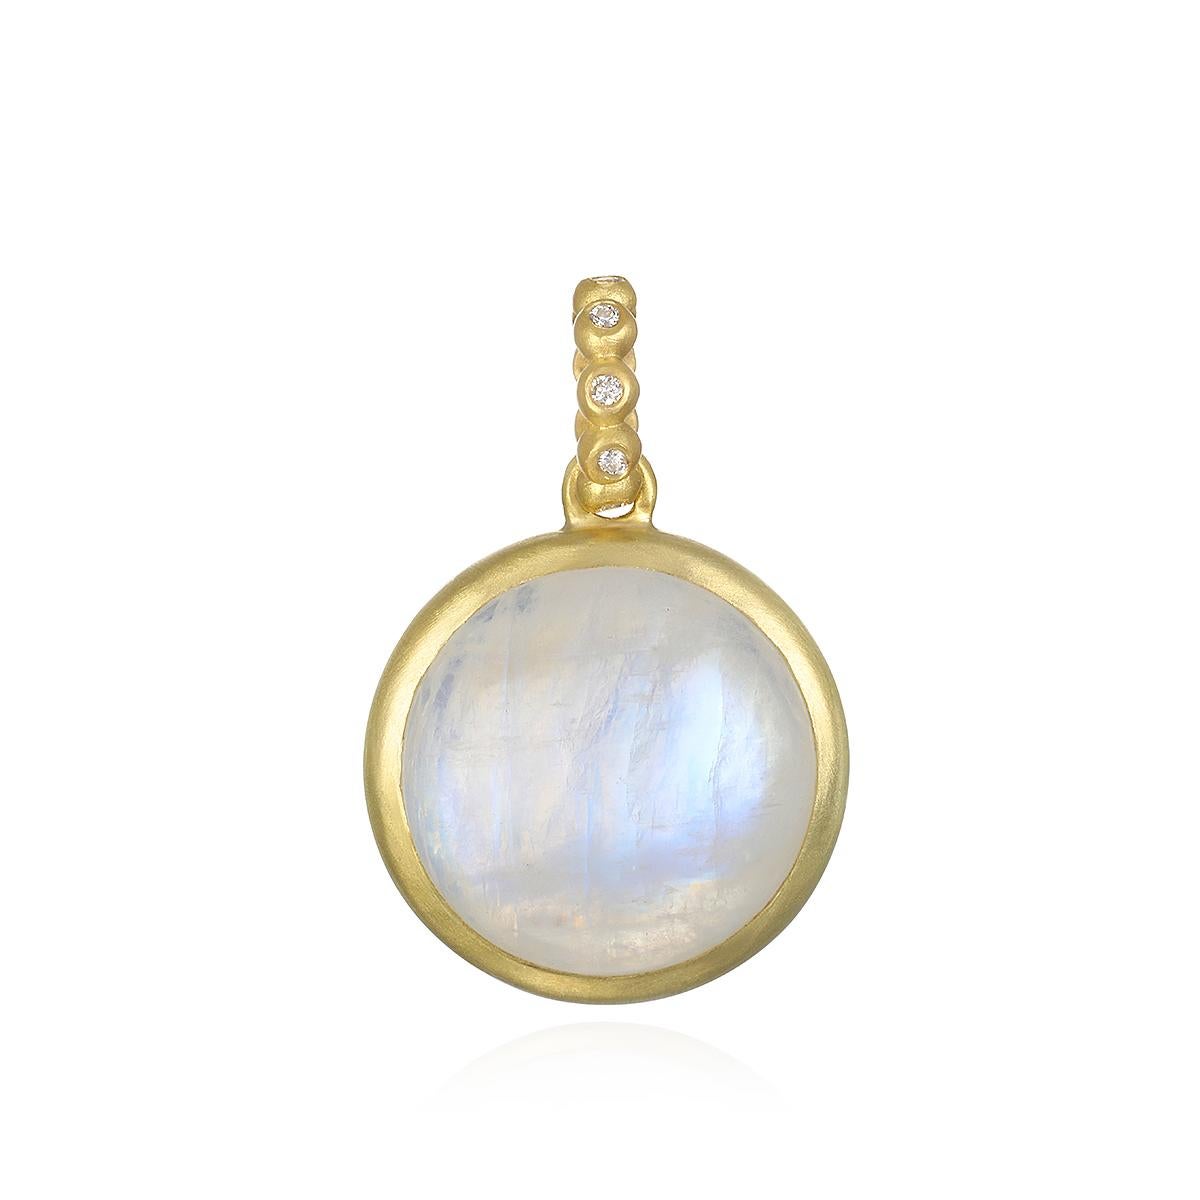 As ancient as the moon itself, the meaning of Moonstone lies within its energy. The pearly iridescence of this 18 Karat Gold Round Moonstone Pendant with its diamond bail evokes tranquility and exudes a glowing vitality. Worn alone or layered with